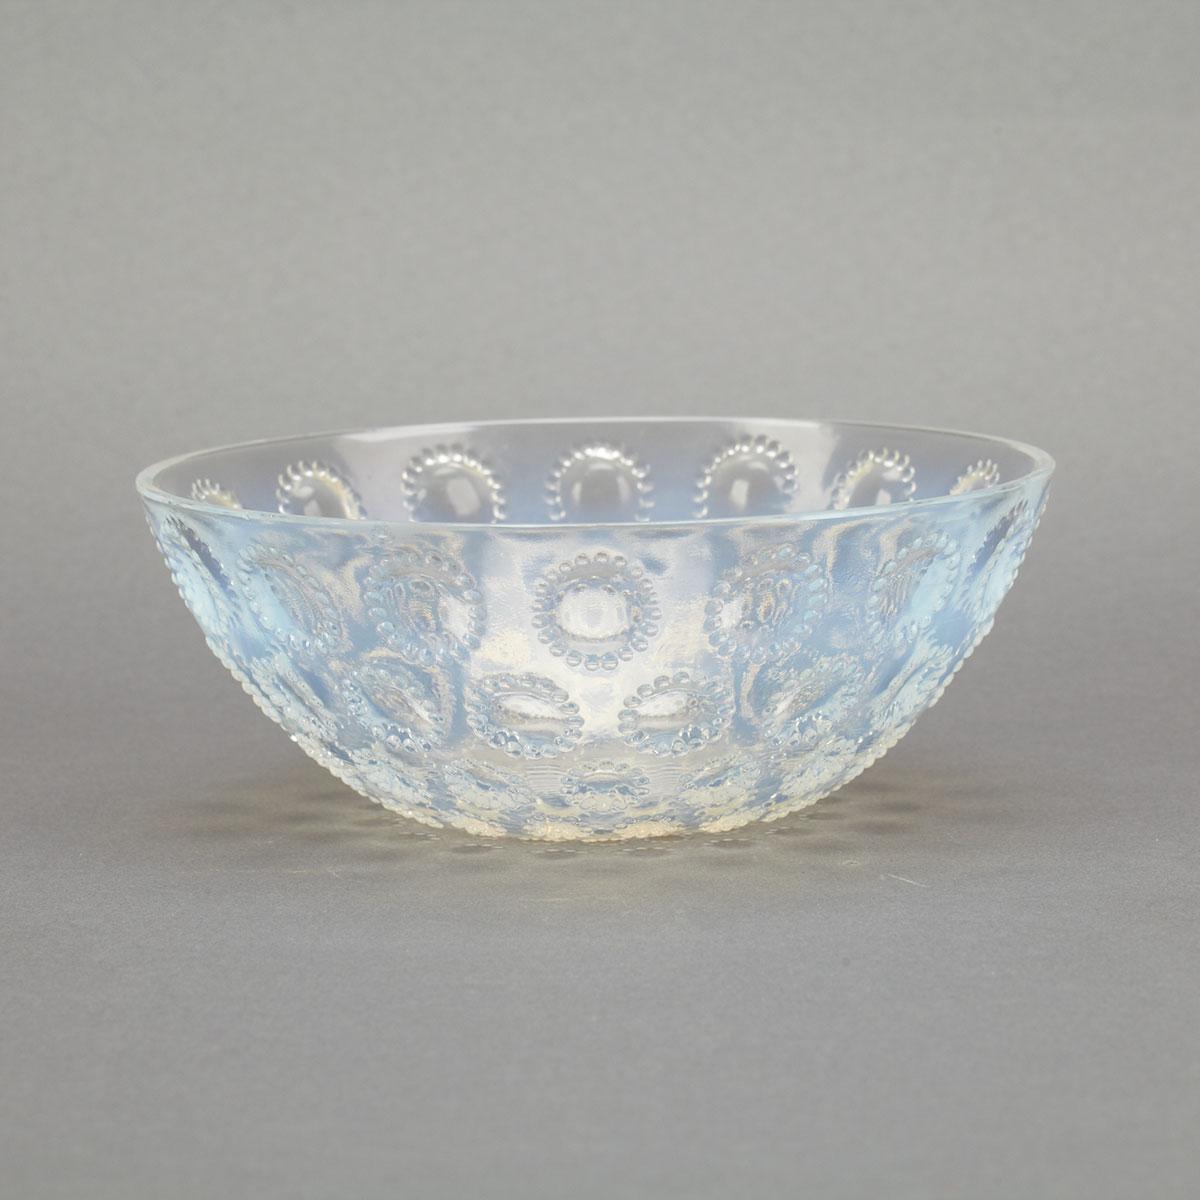 ‘Asters’, Lalique Moulded Opalescent Glass Bowl, 1930s